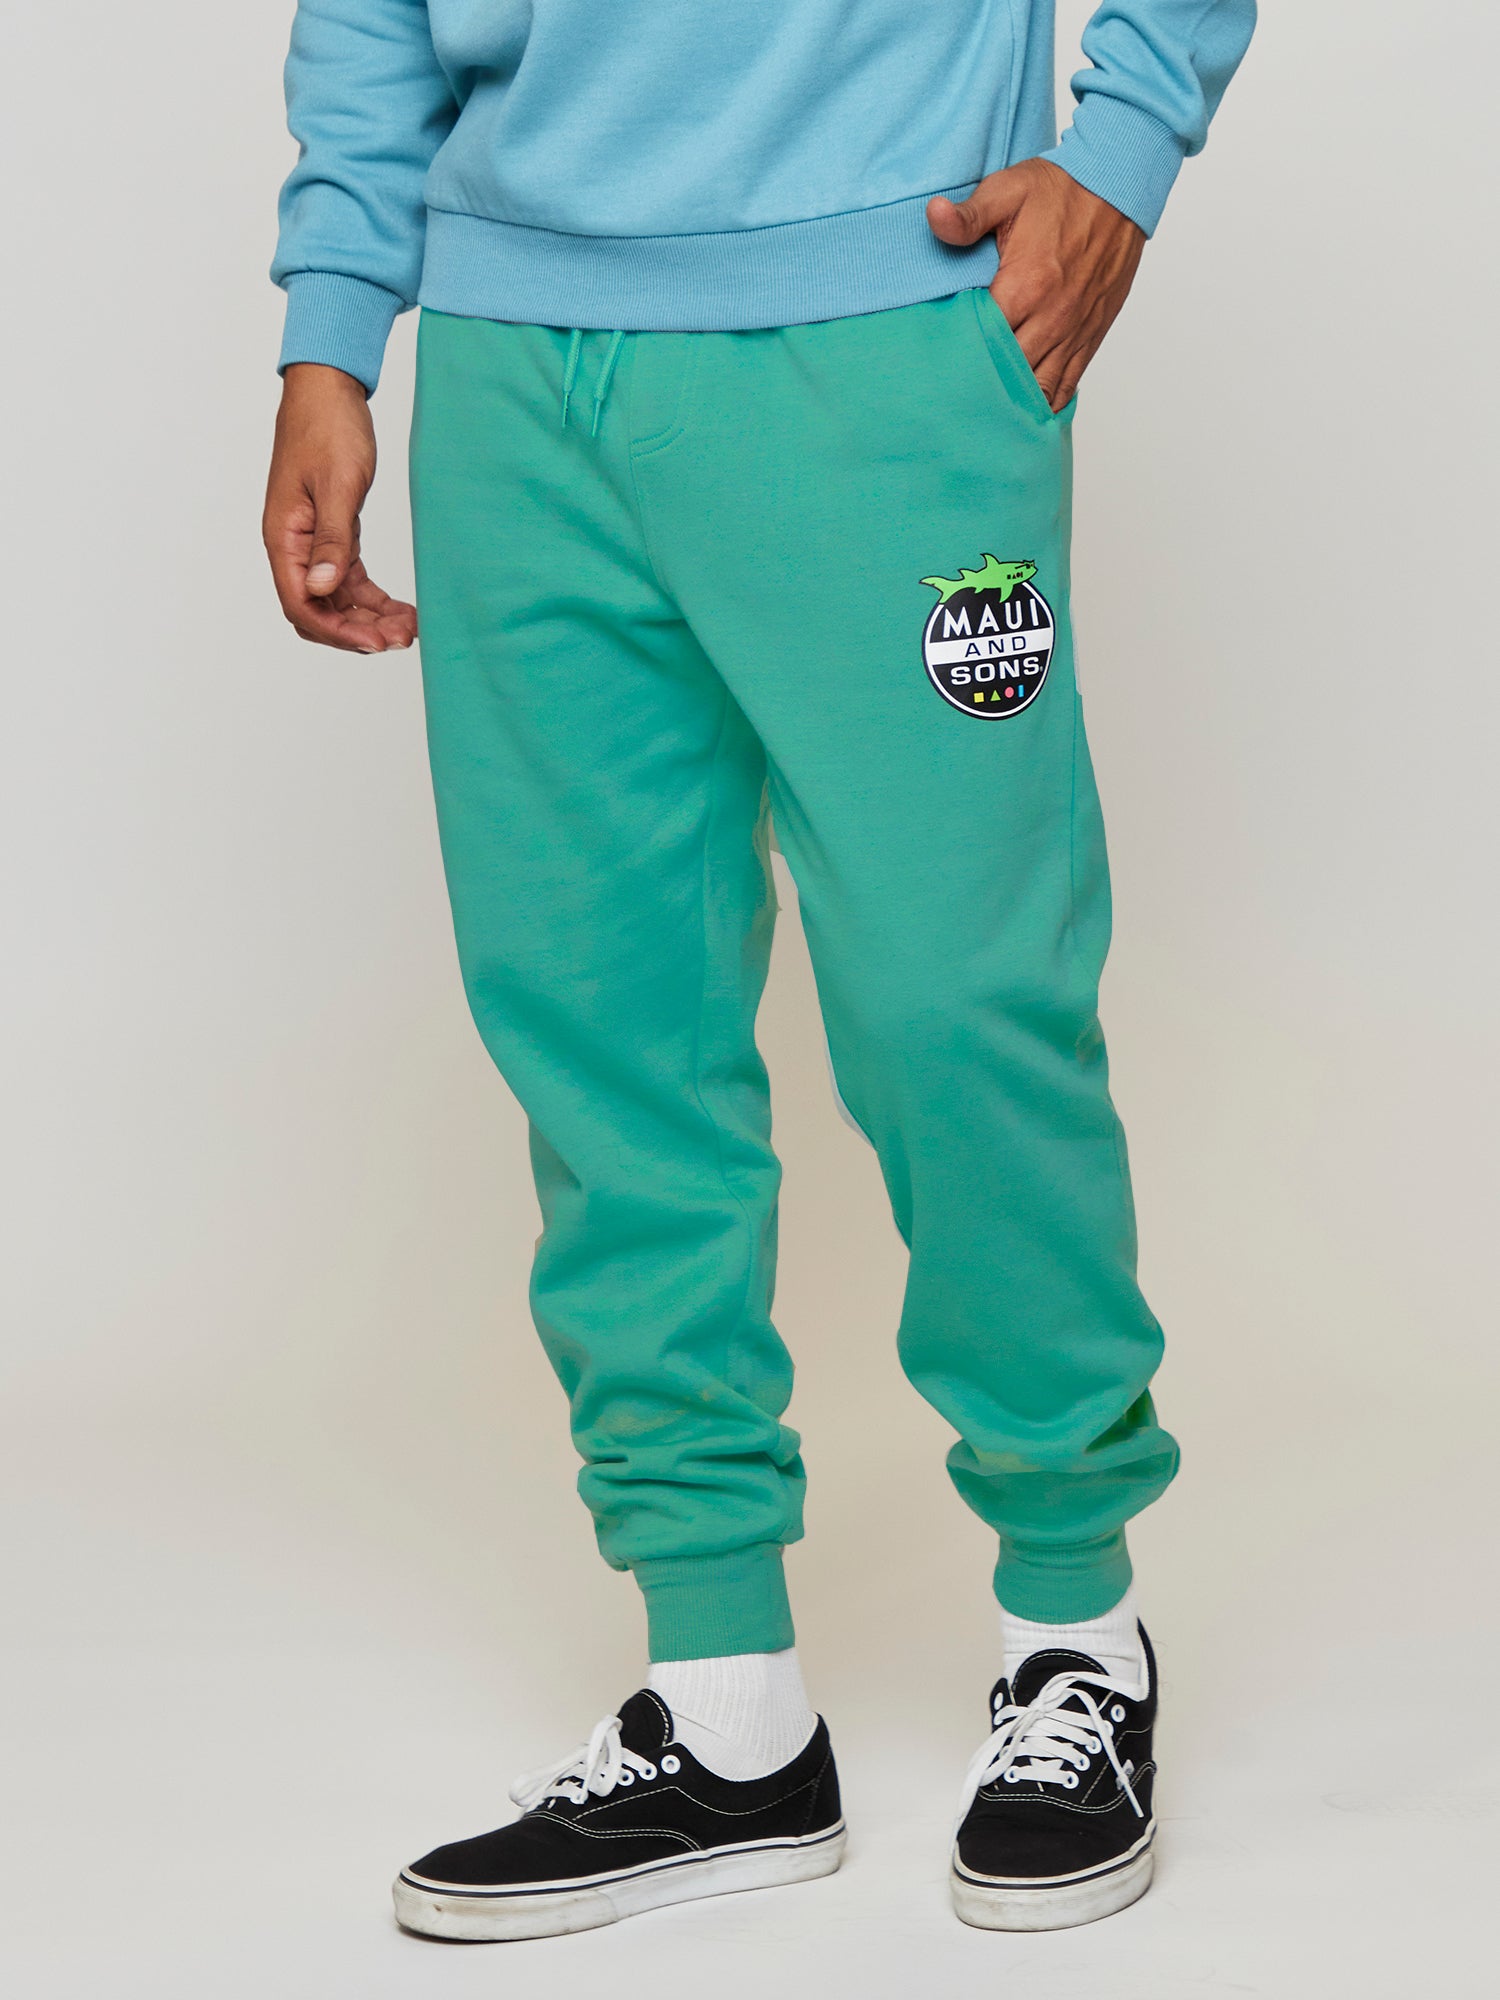 Invasion Jogger Sweatpant in Turquoise